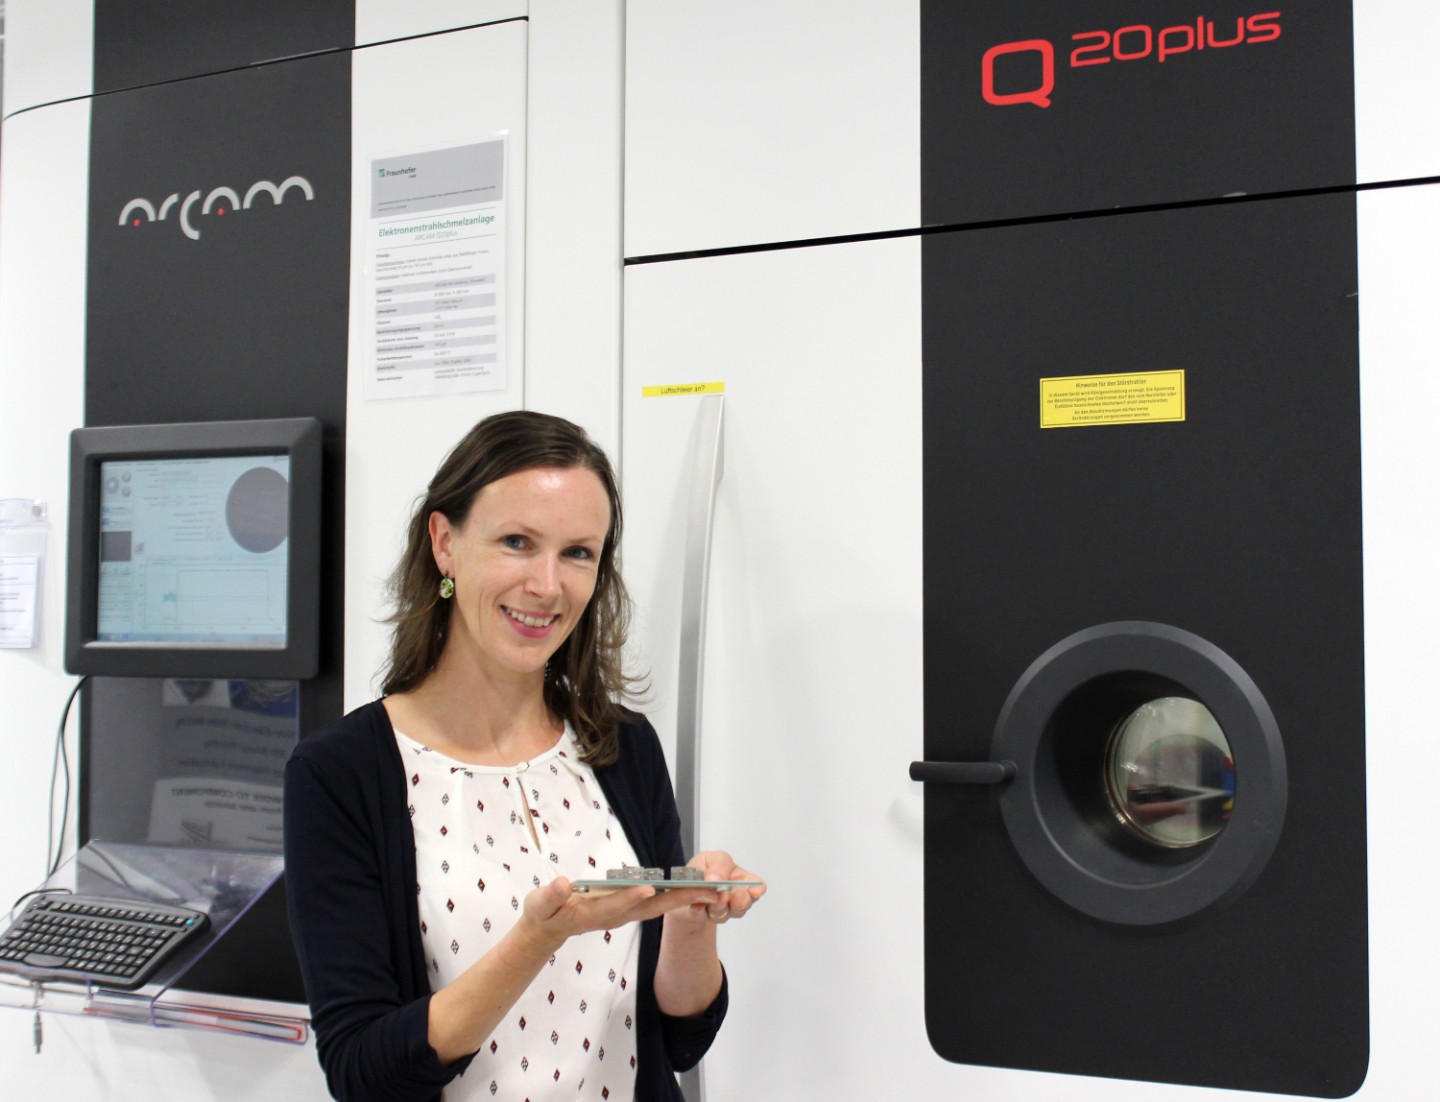 Materials scientist Dr Inge Lindemann at Fraunhofer has been researching how to use powder technologies.